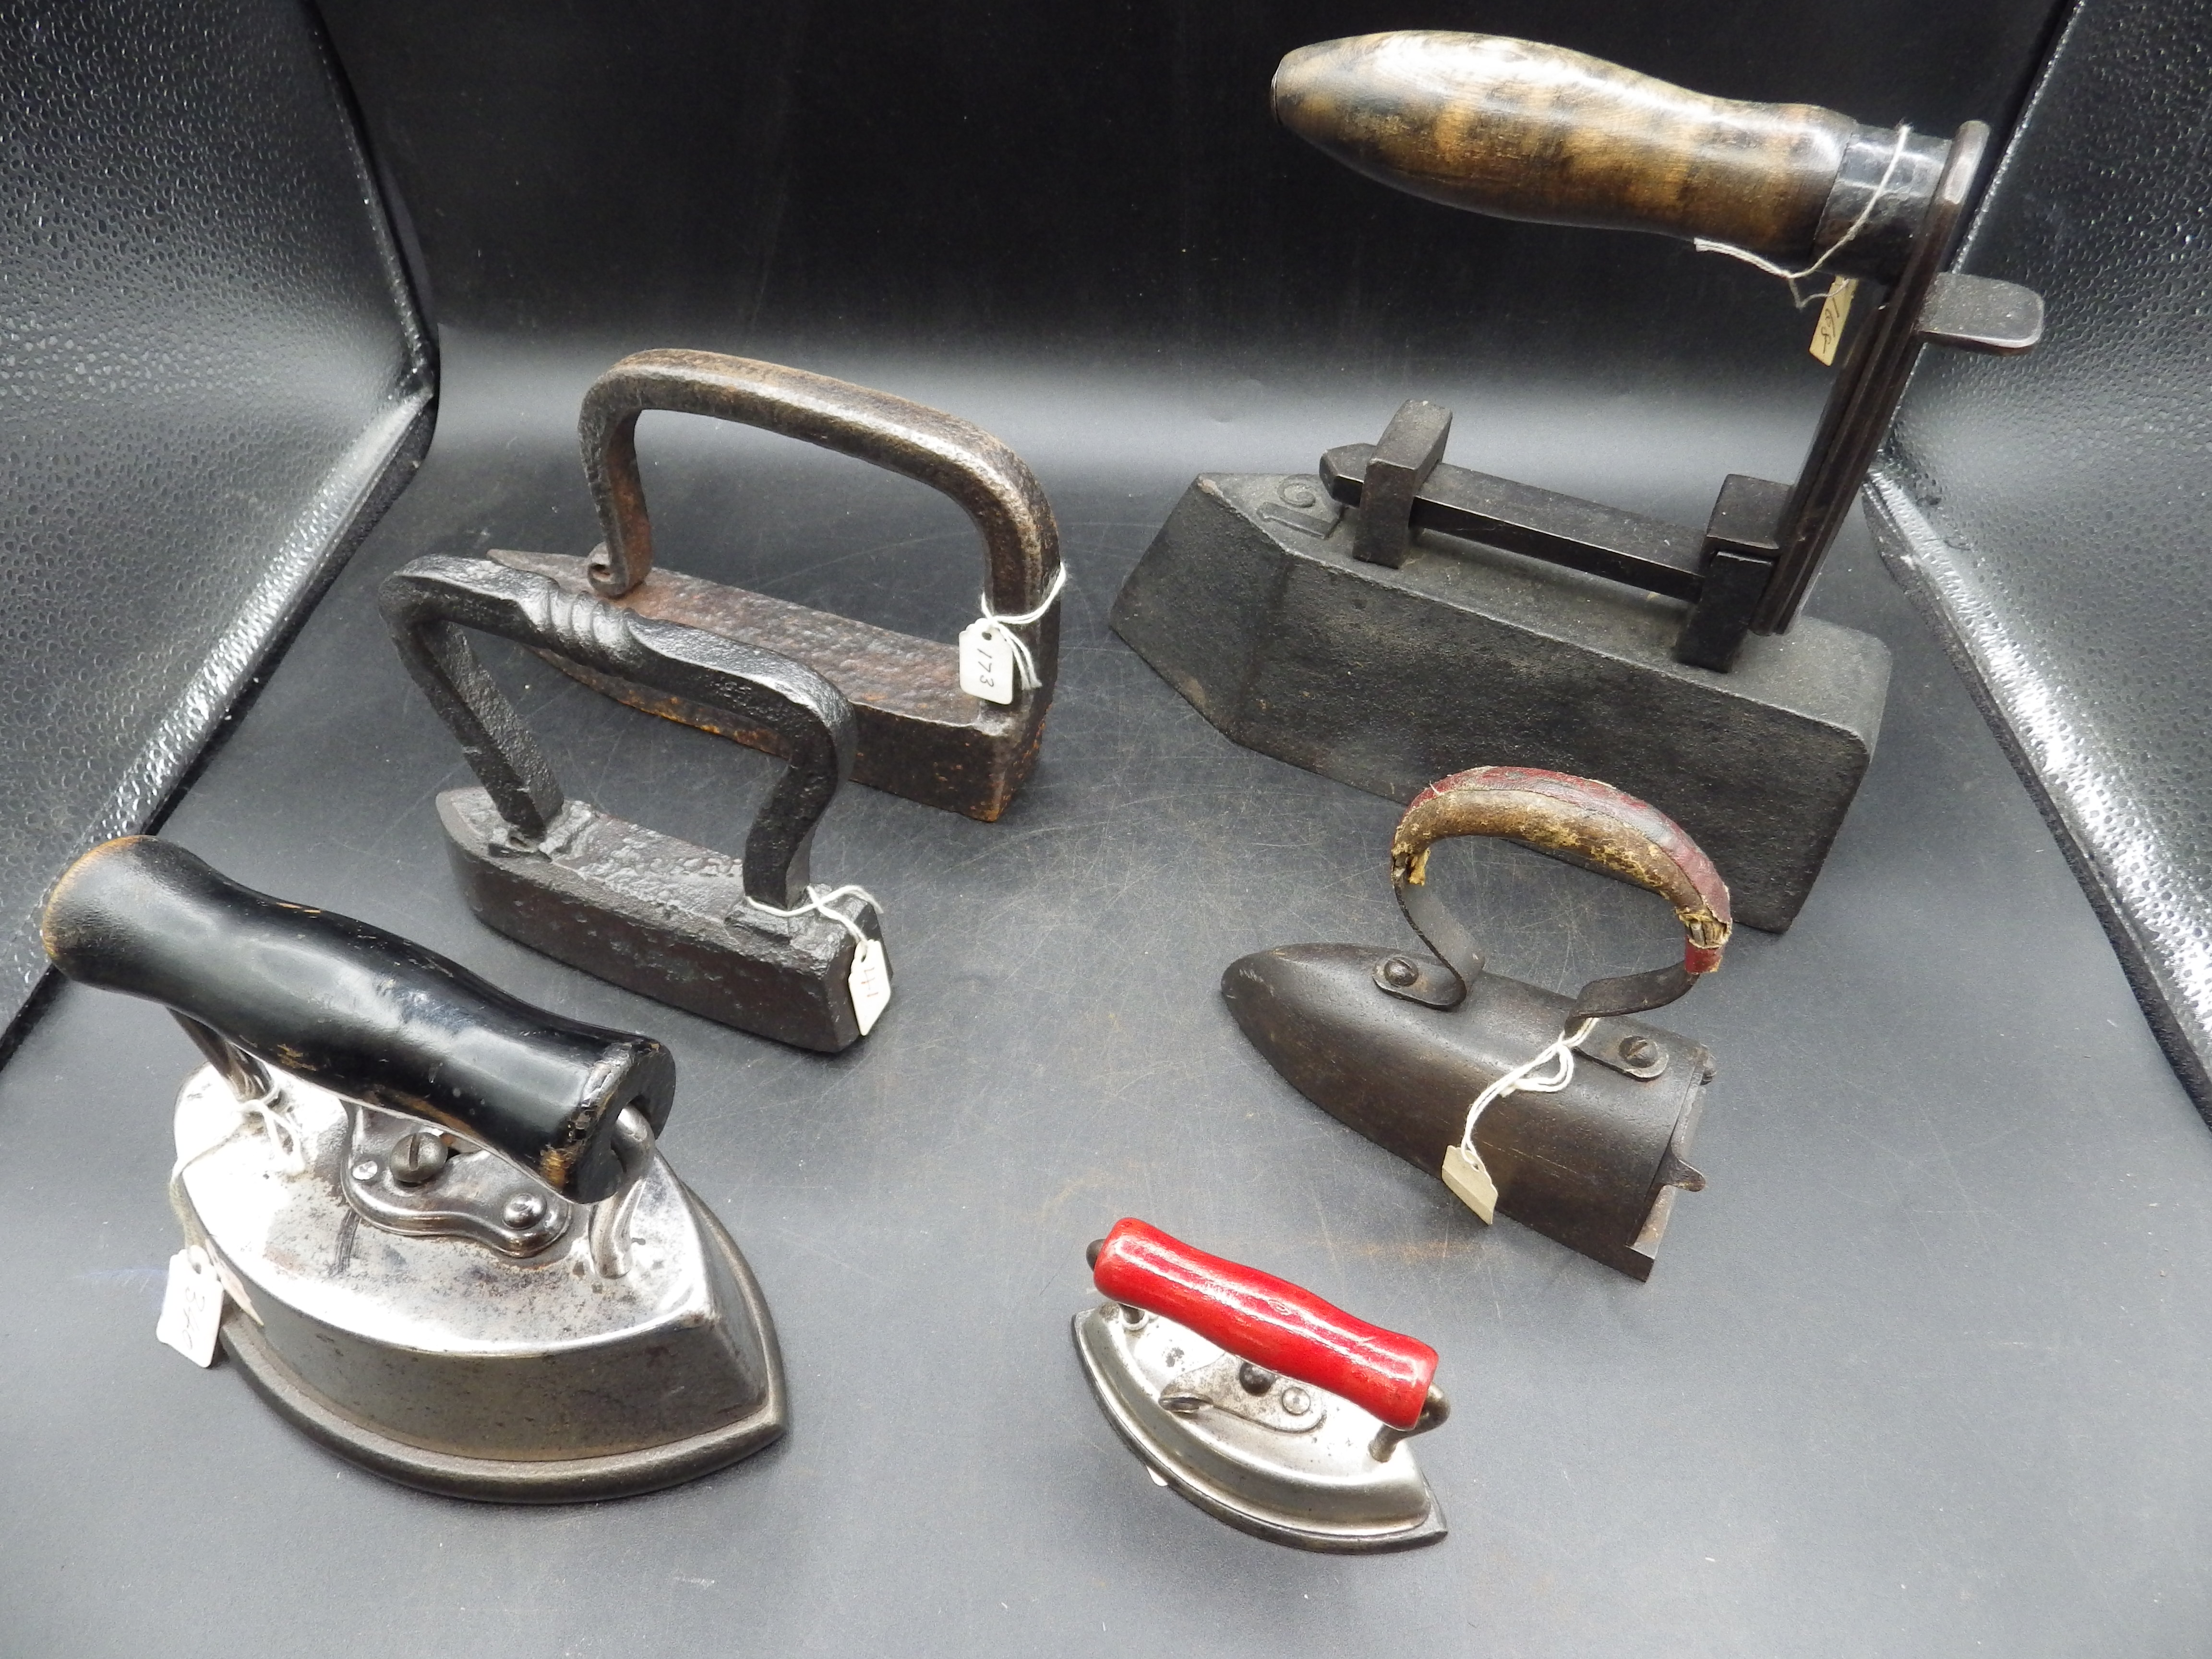 6 assorted irons to include tailor goose irons incl one old hand forged iron, box iron with slug and